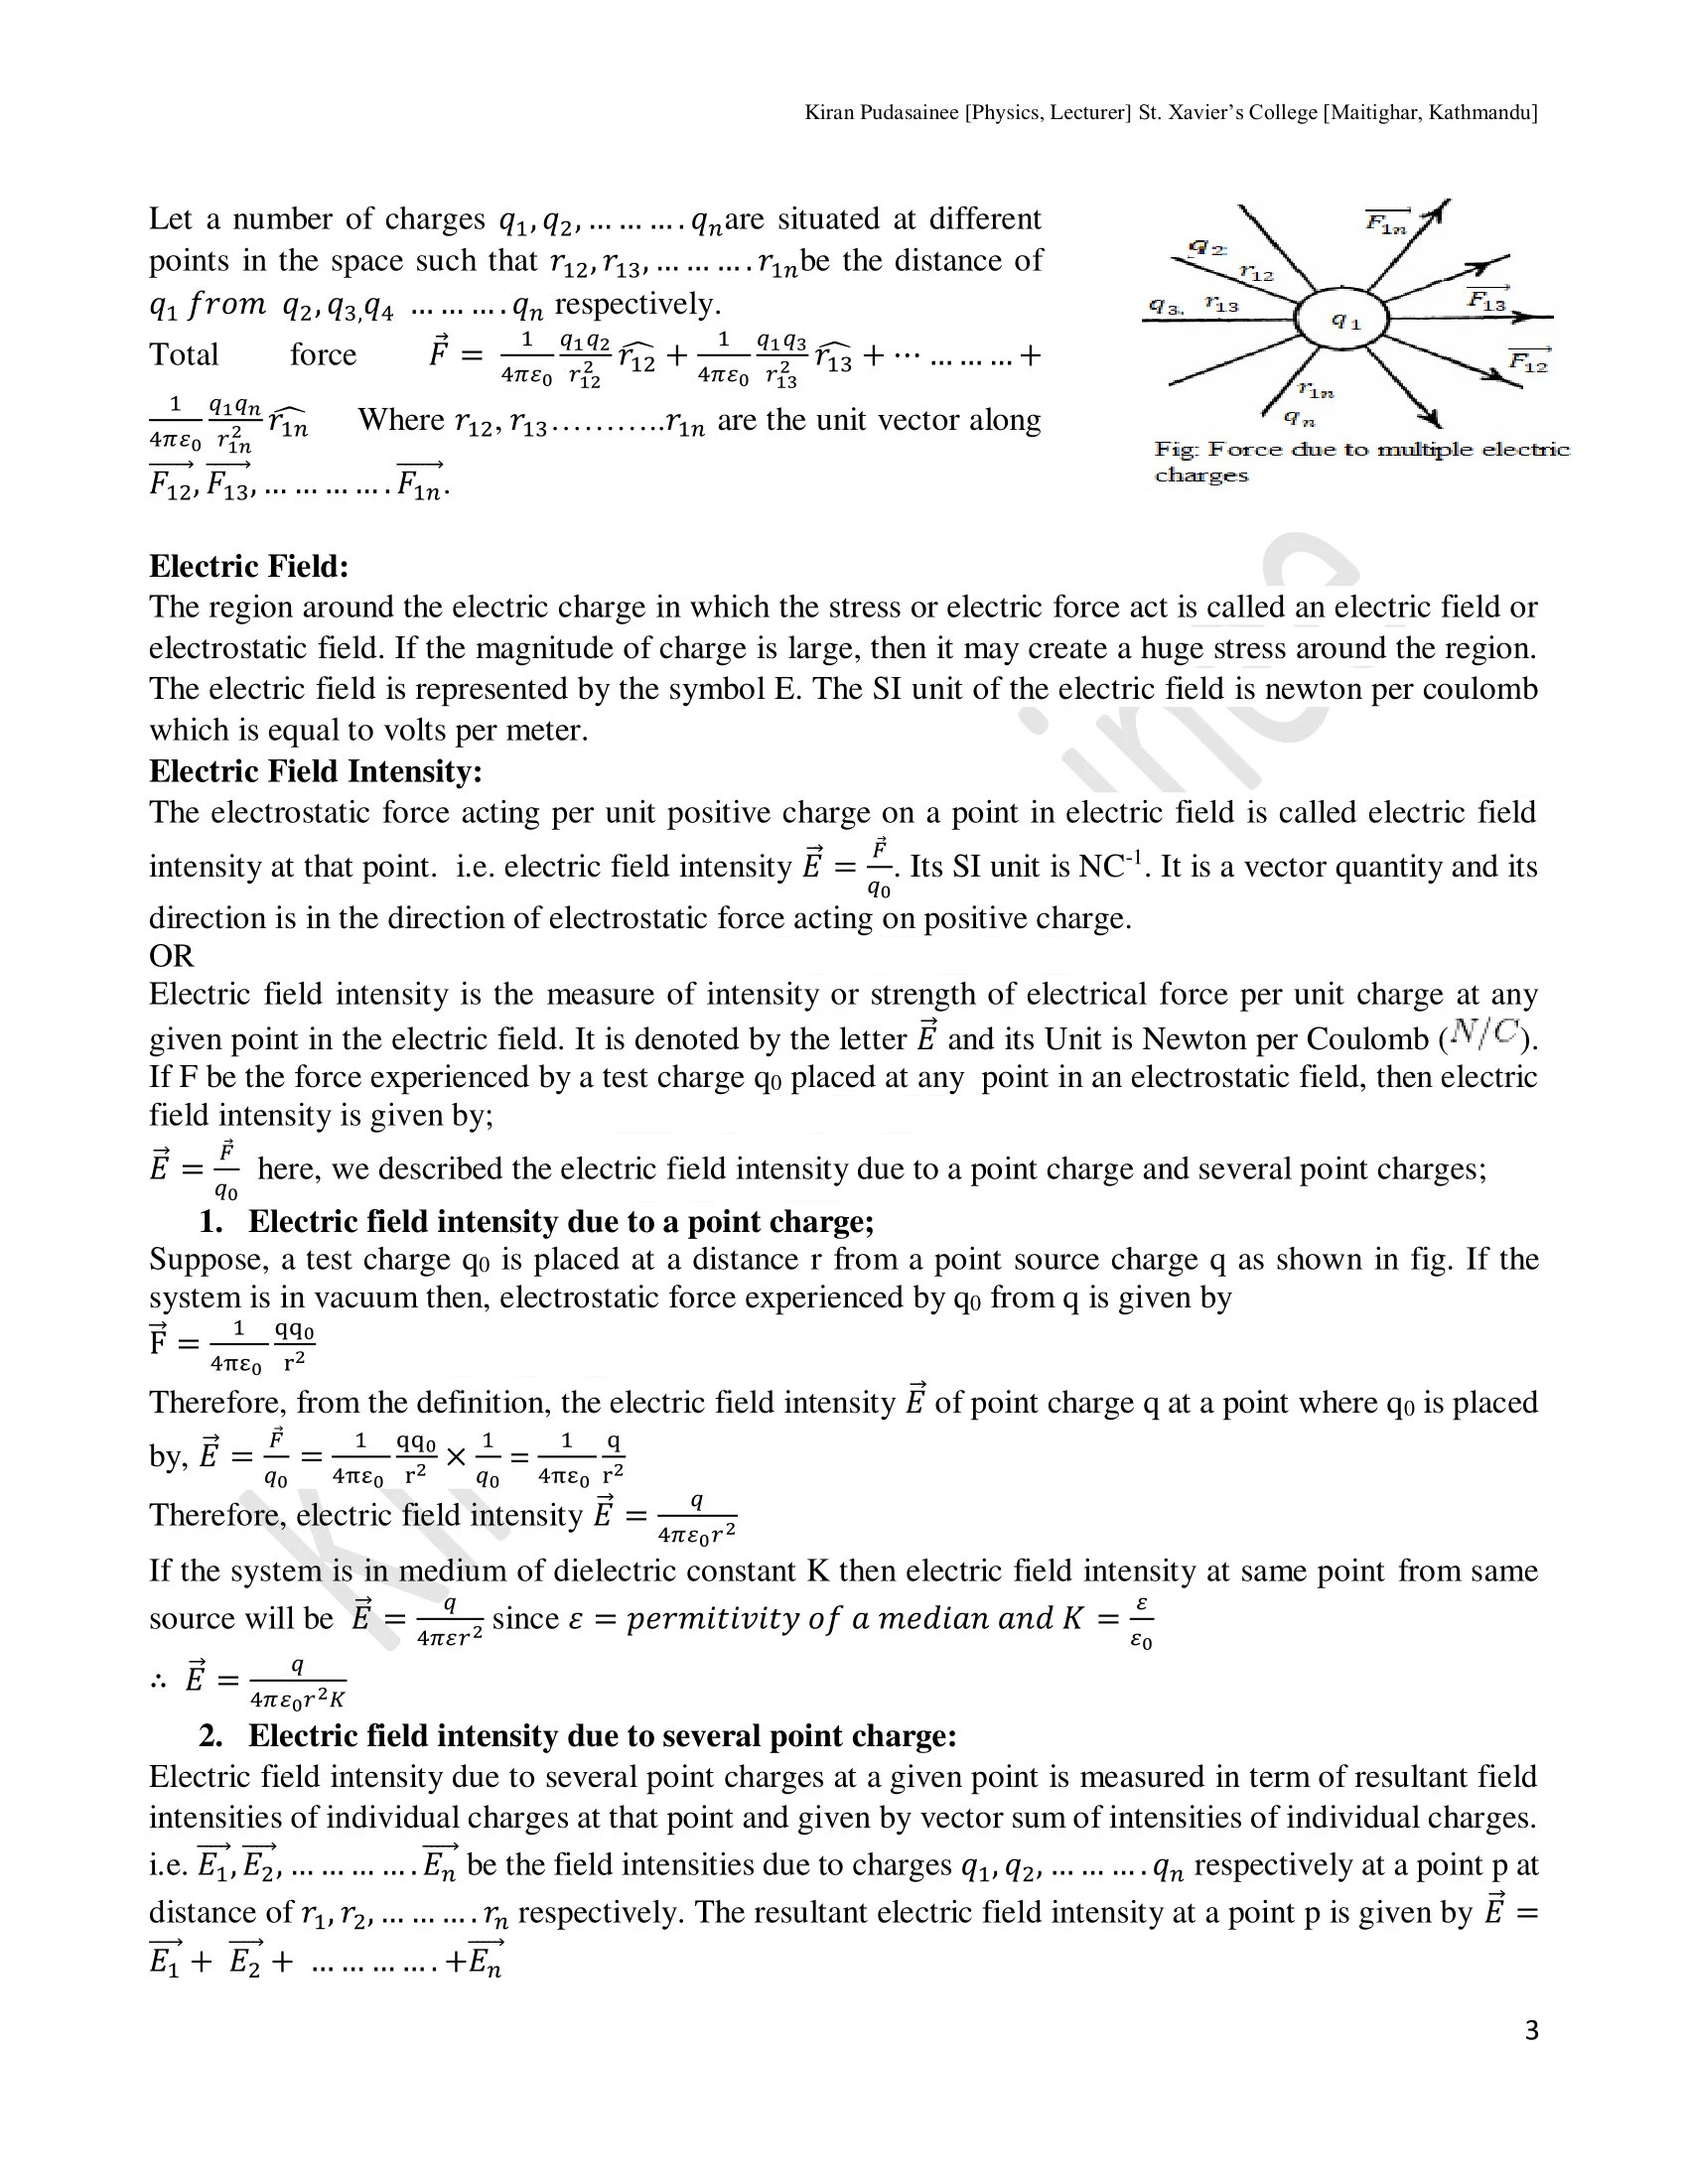 Electrical And Magnetic Field & Potential: B.Sc. CSIT Physics Unit 2 Notes